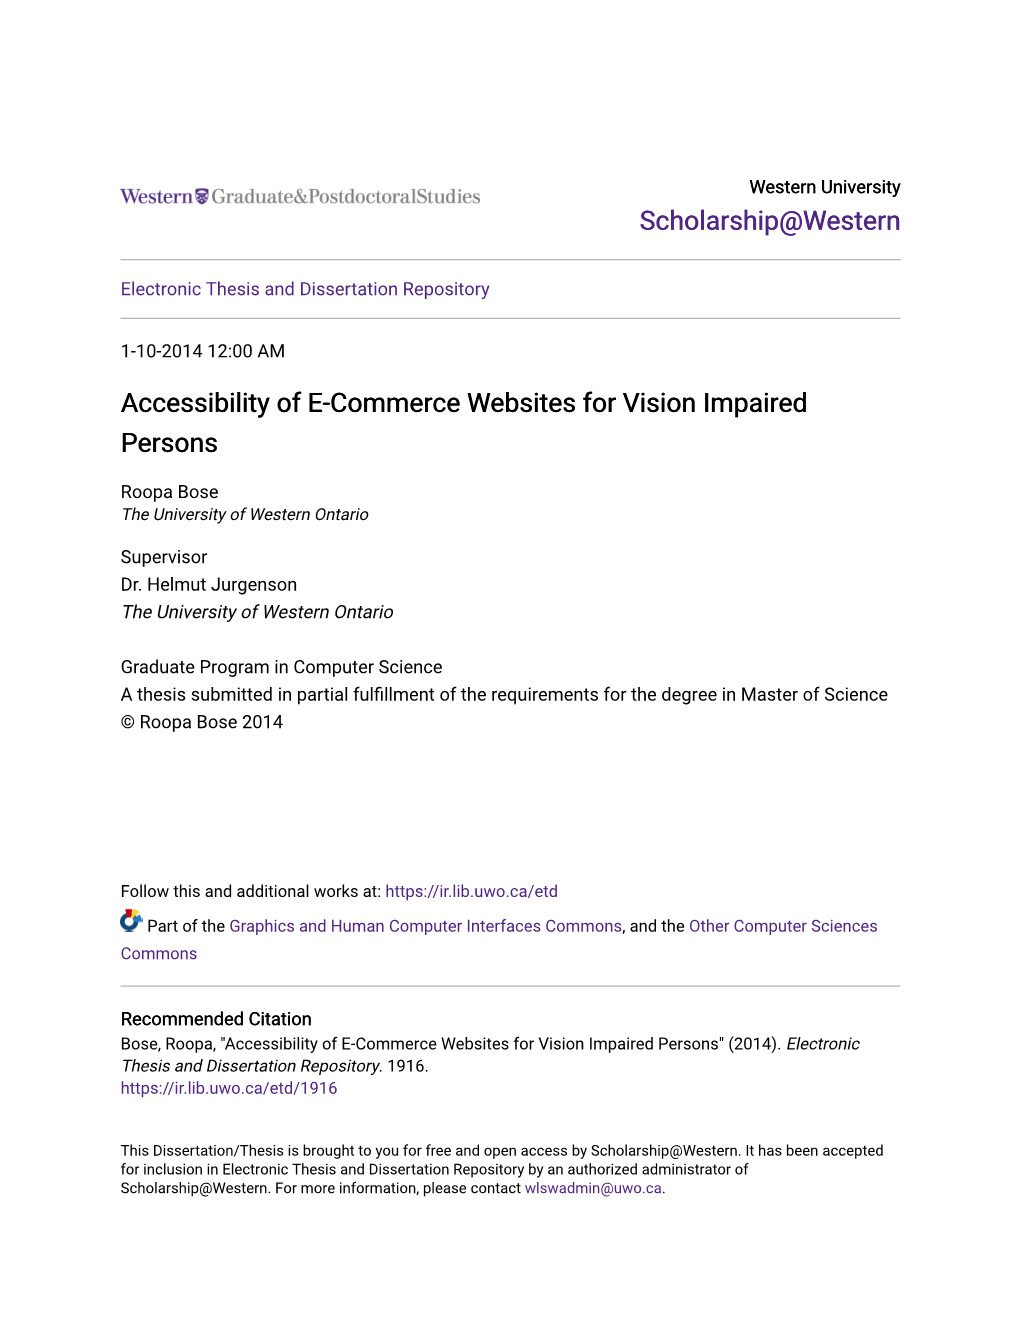 Accessibility of E-Commerce Websites for Vision Impaired Persons